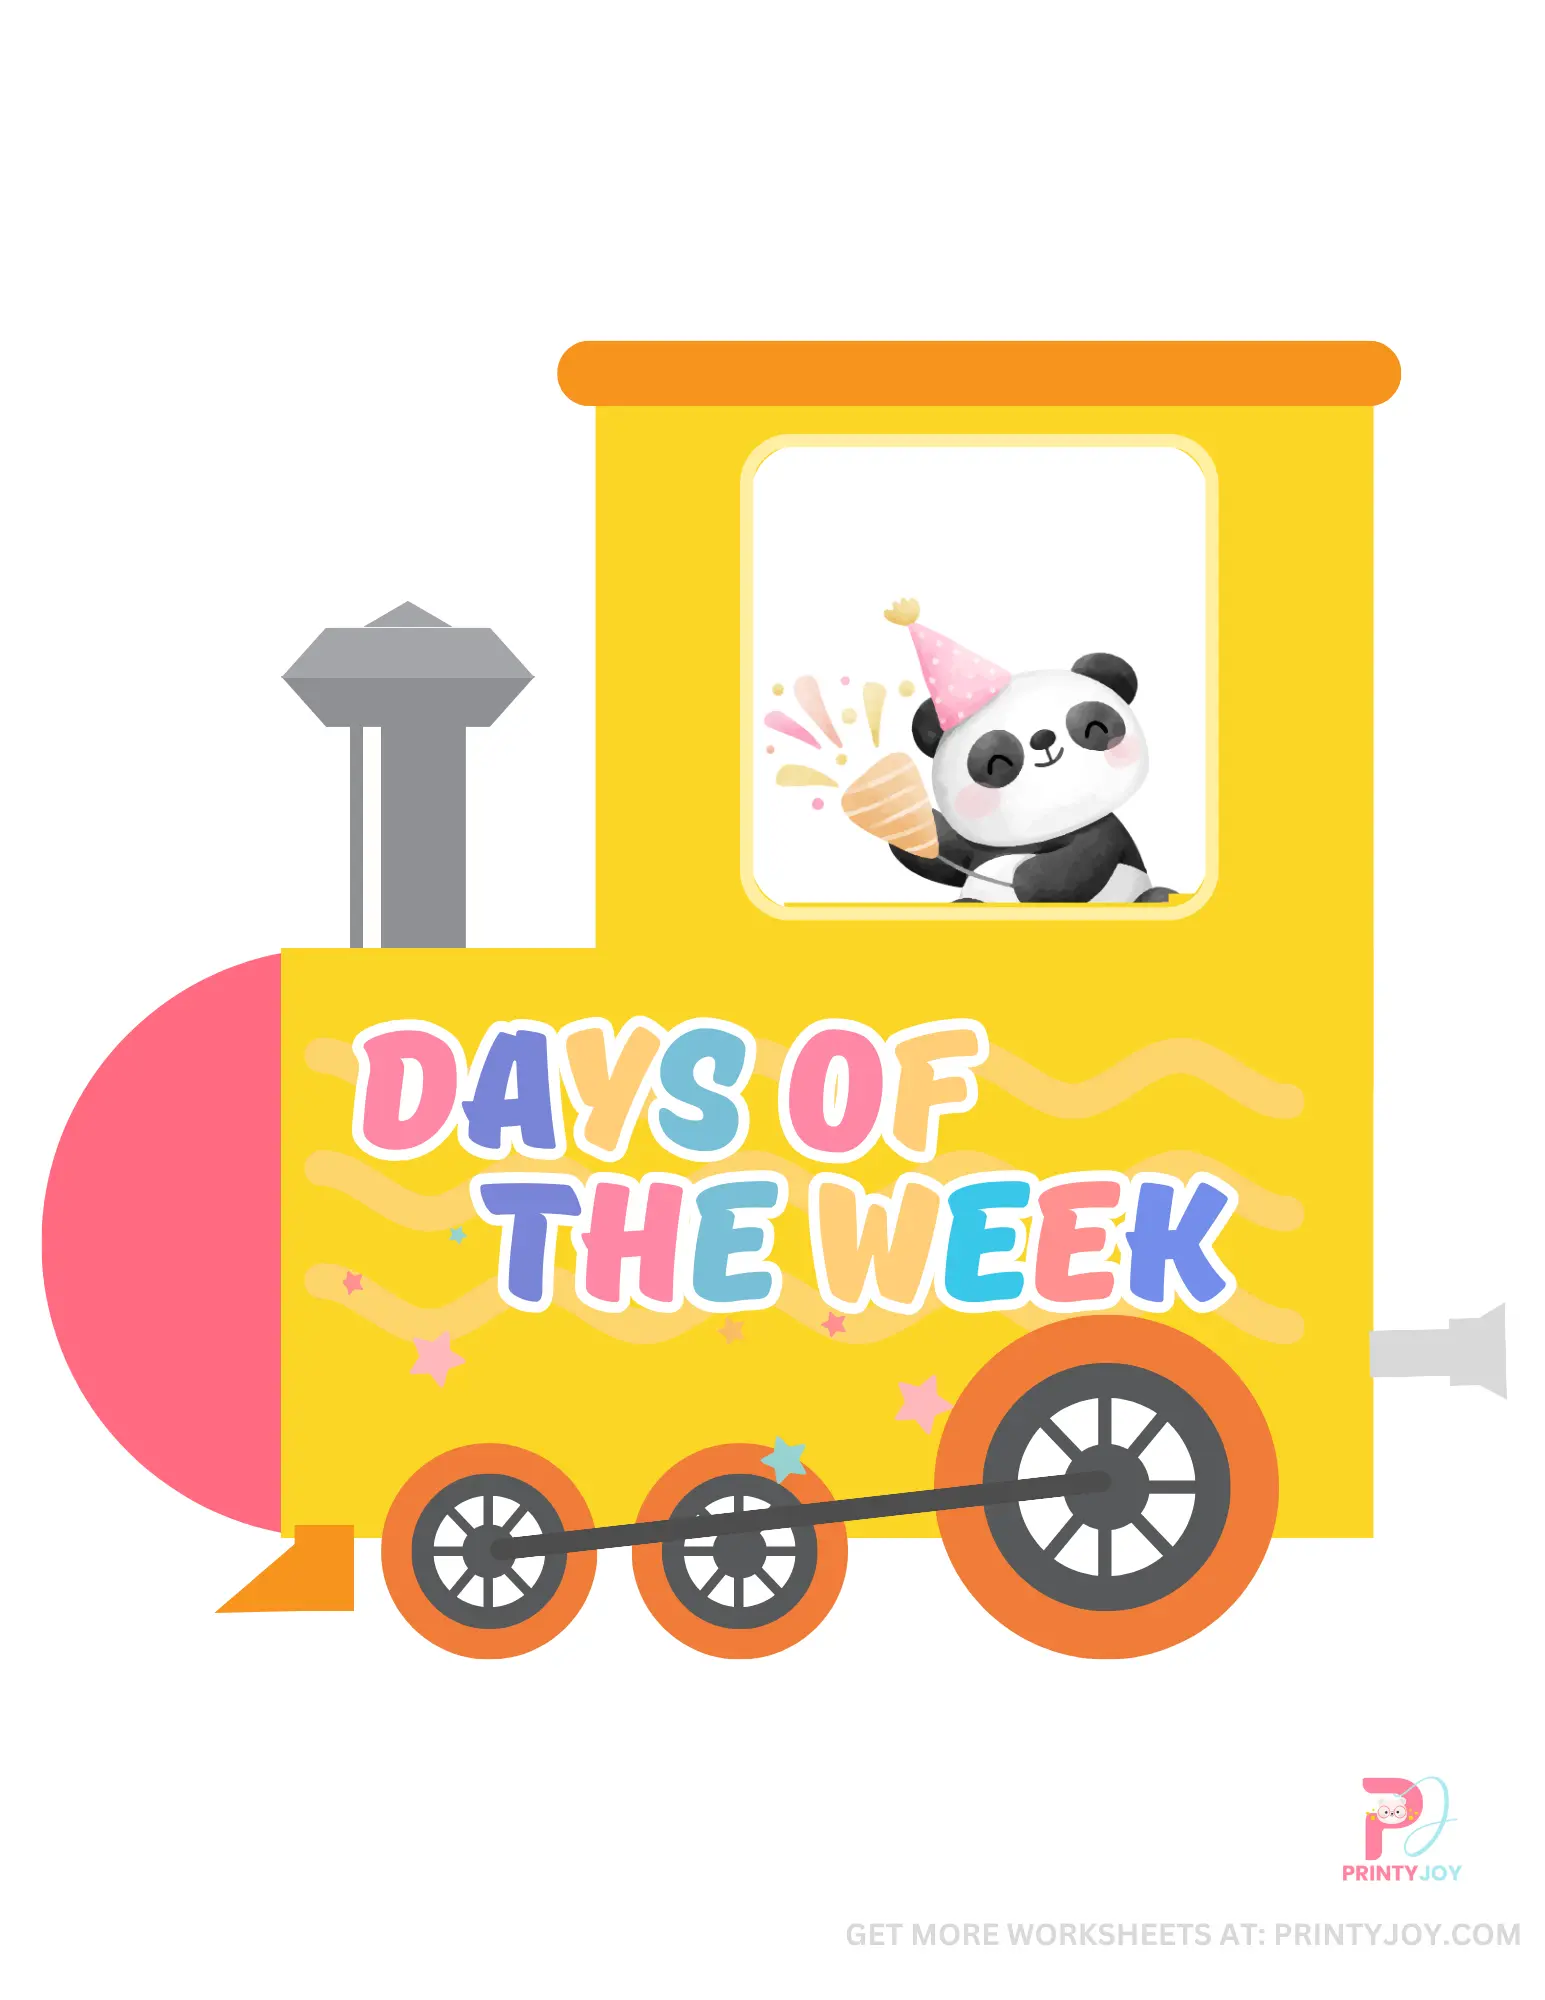 Days of the week flashcards train pdf free download